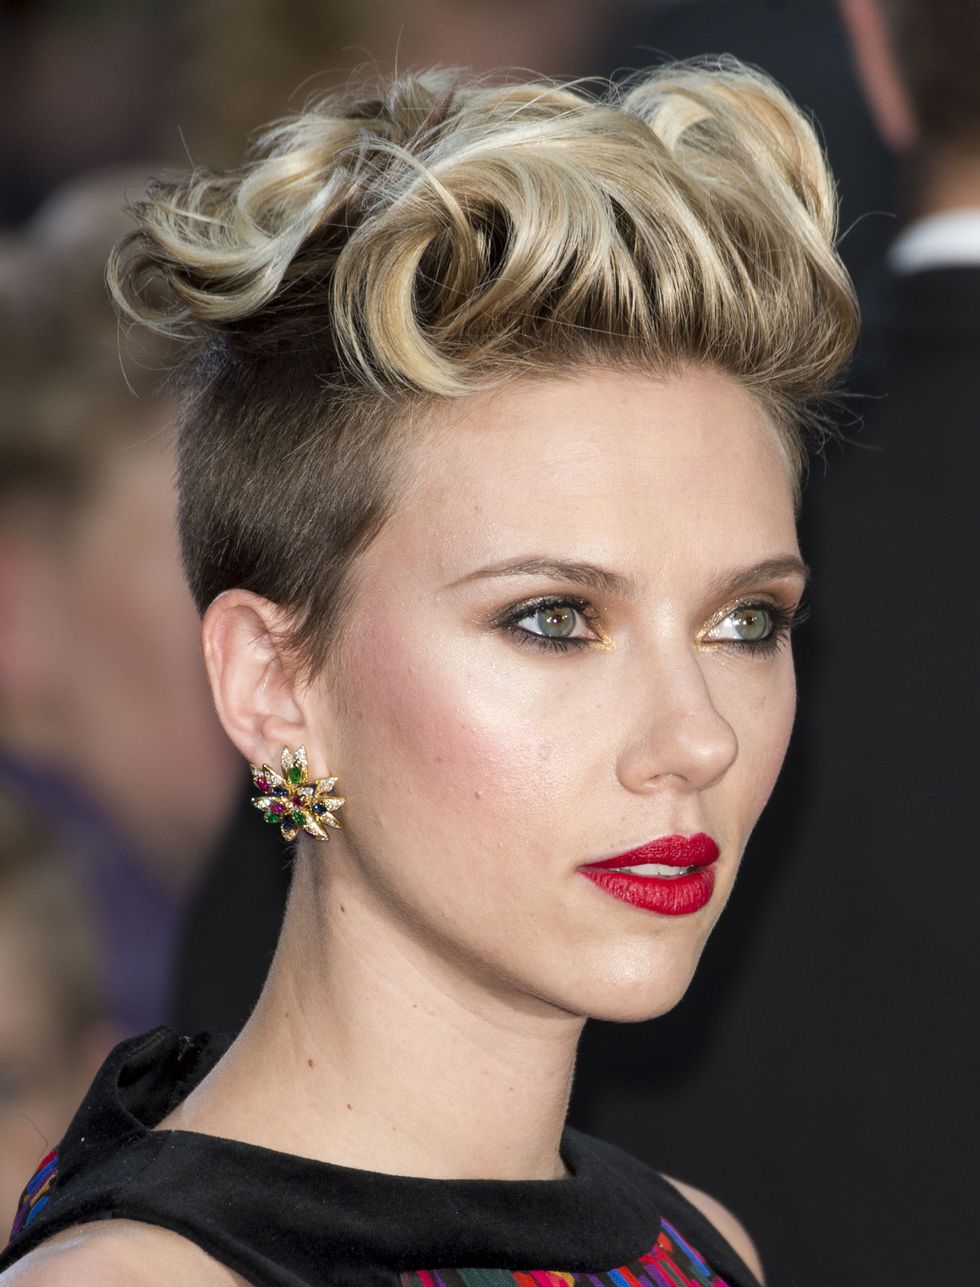 Scarlett Johansson's hairstyle at The Avengers premiere